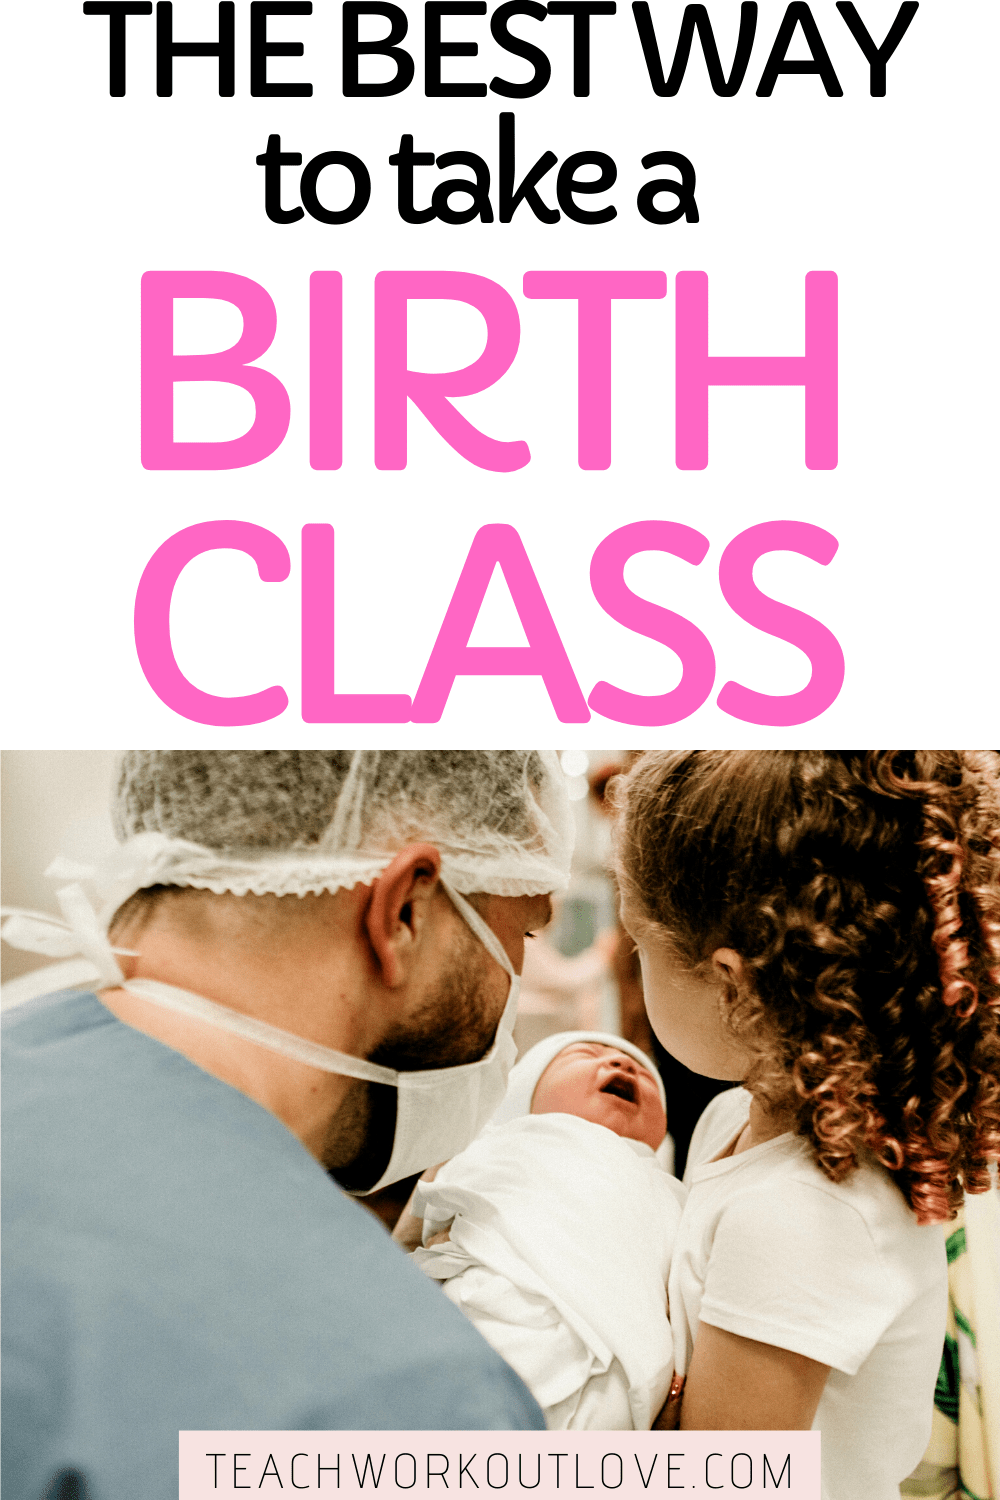 Taking a childbirth class has several benefits. Ultimately, its about you having an easier and safer labor when you understand birth and your options.